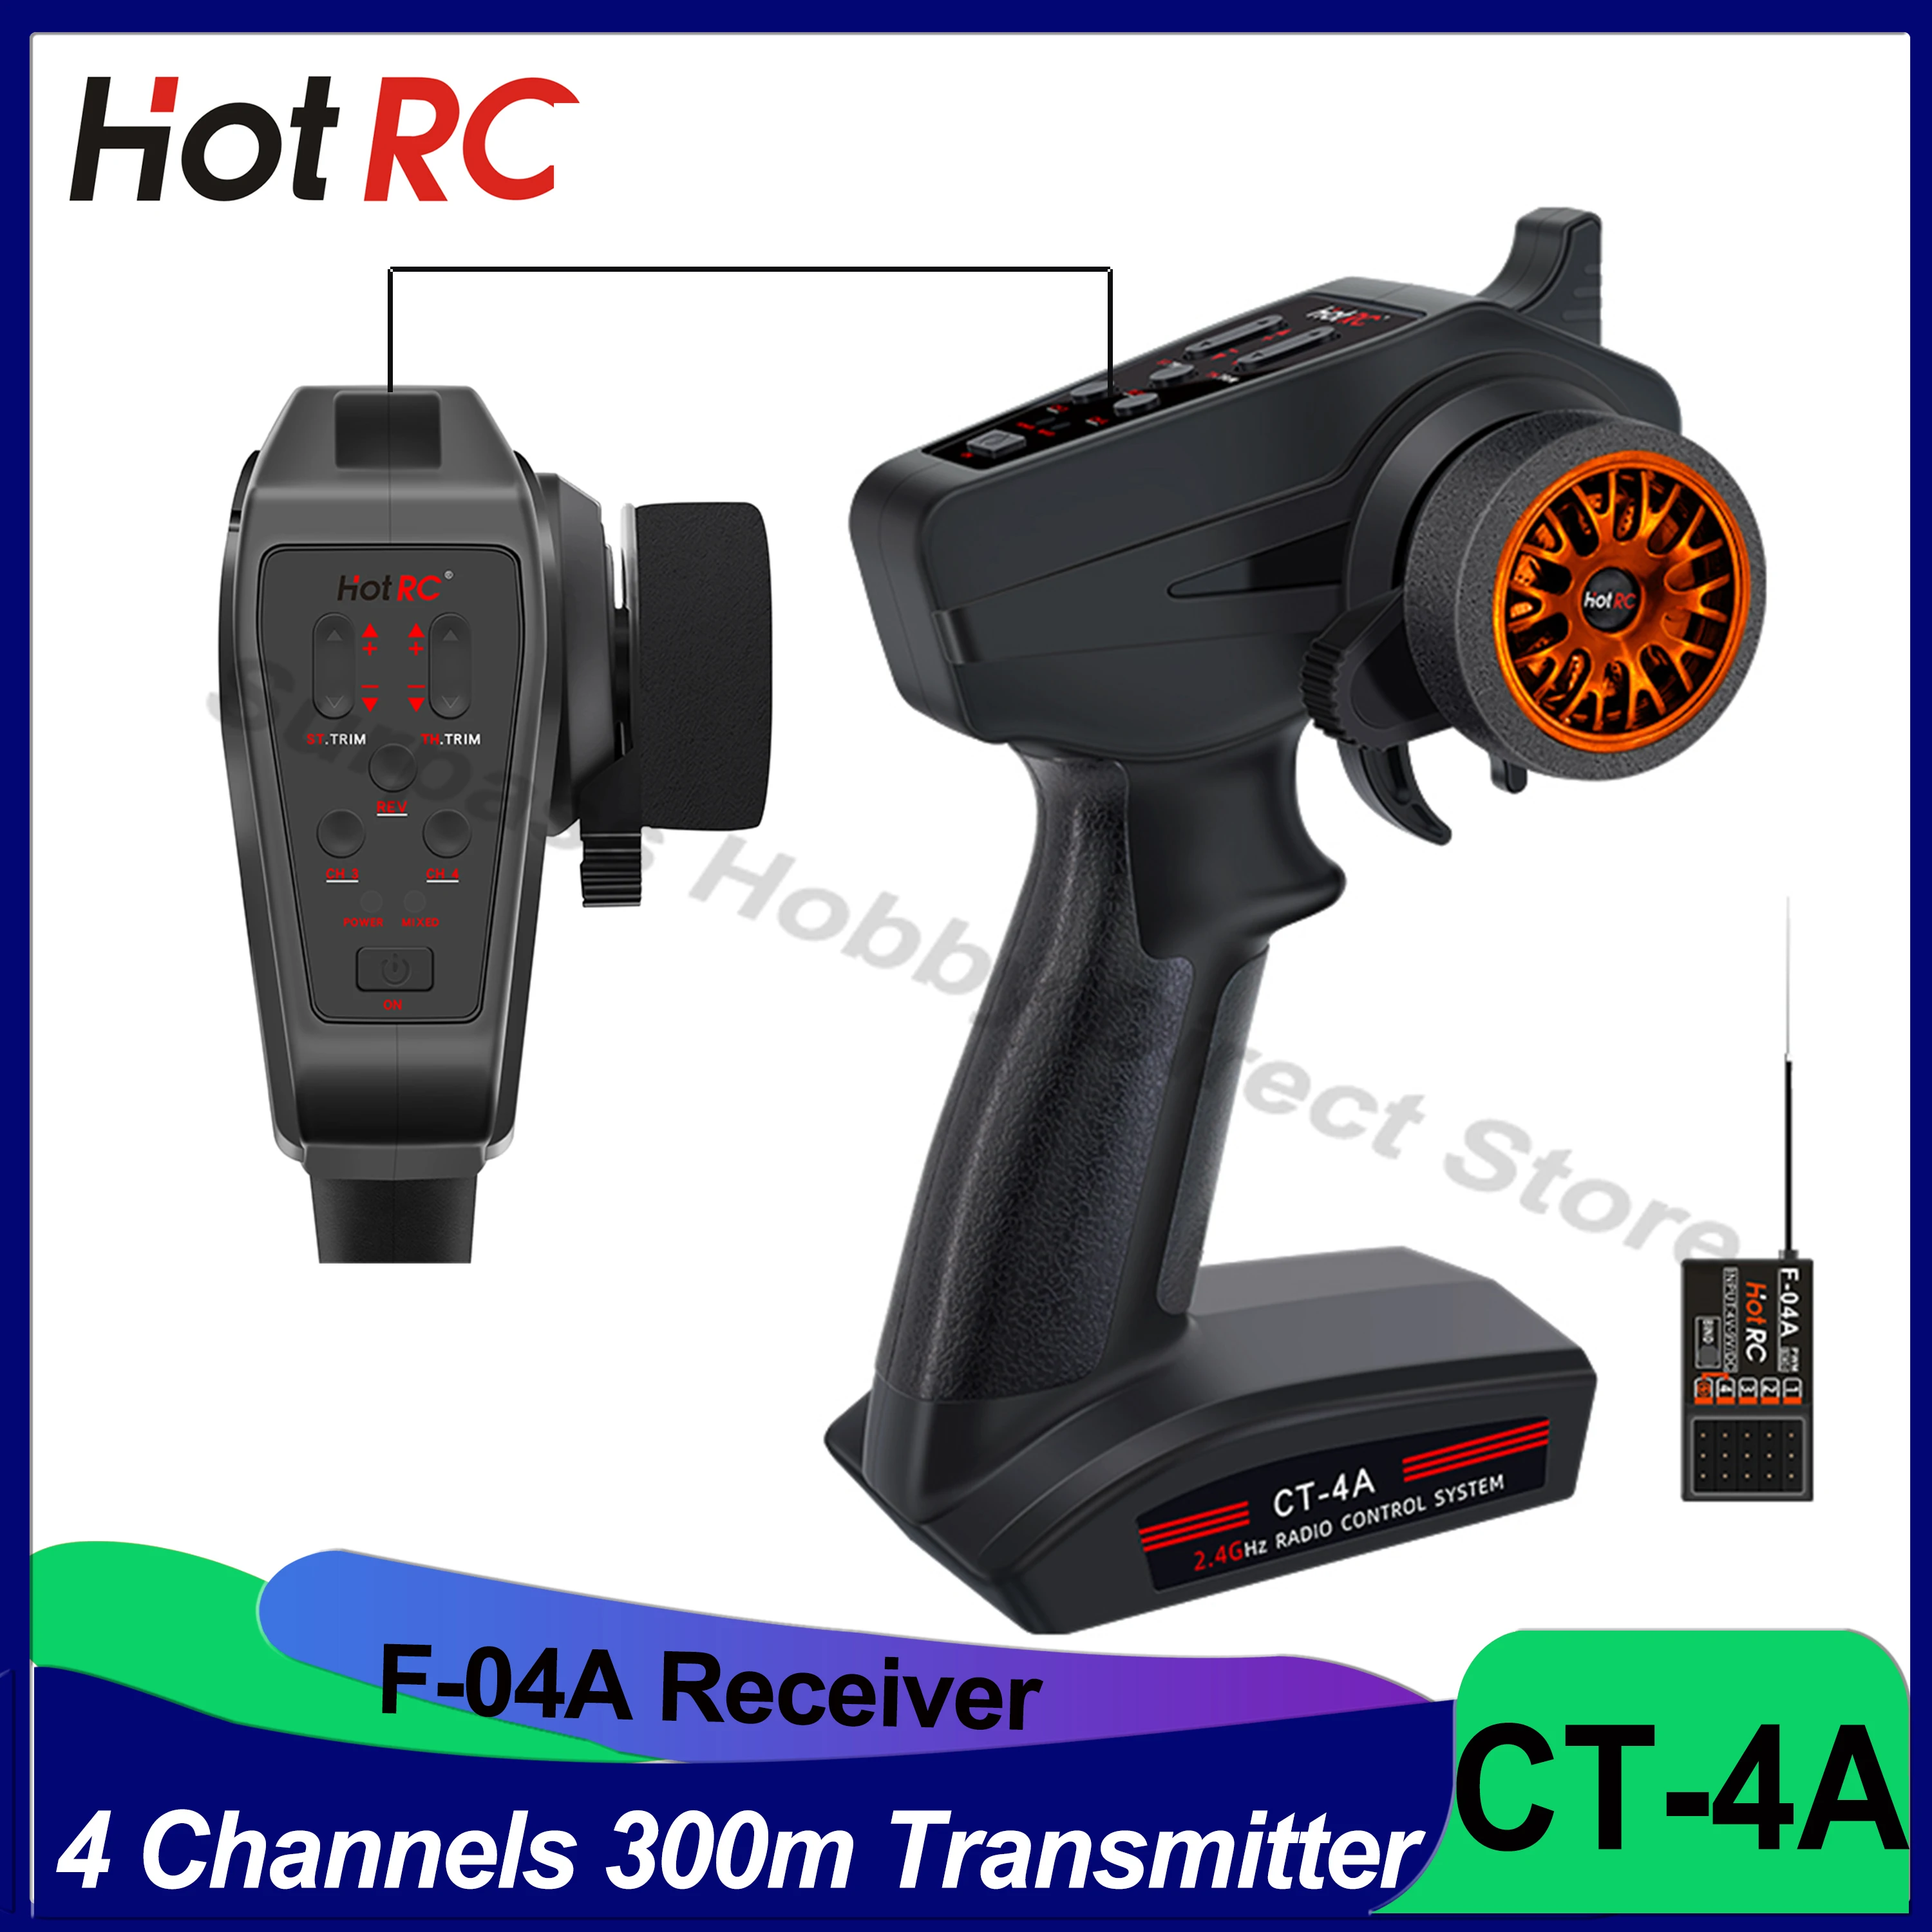 

HOTRC CT-4A 4CH 2.4GHZ 300m Distance 2S 4V-9V Transmitter with F-04A Receiver for RC Car Boat FHSS Radio Control System